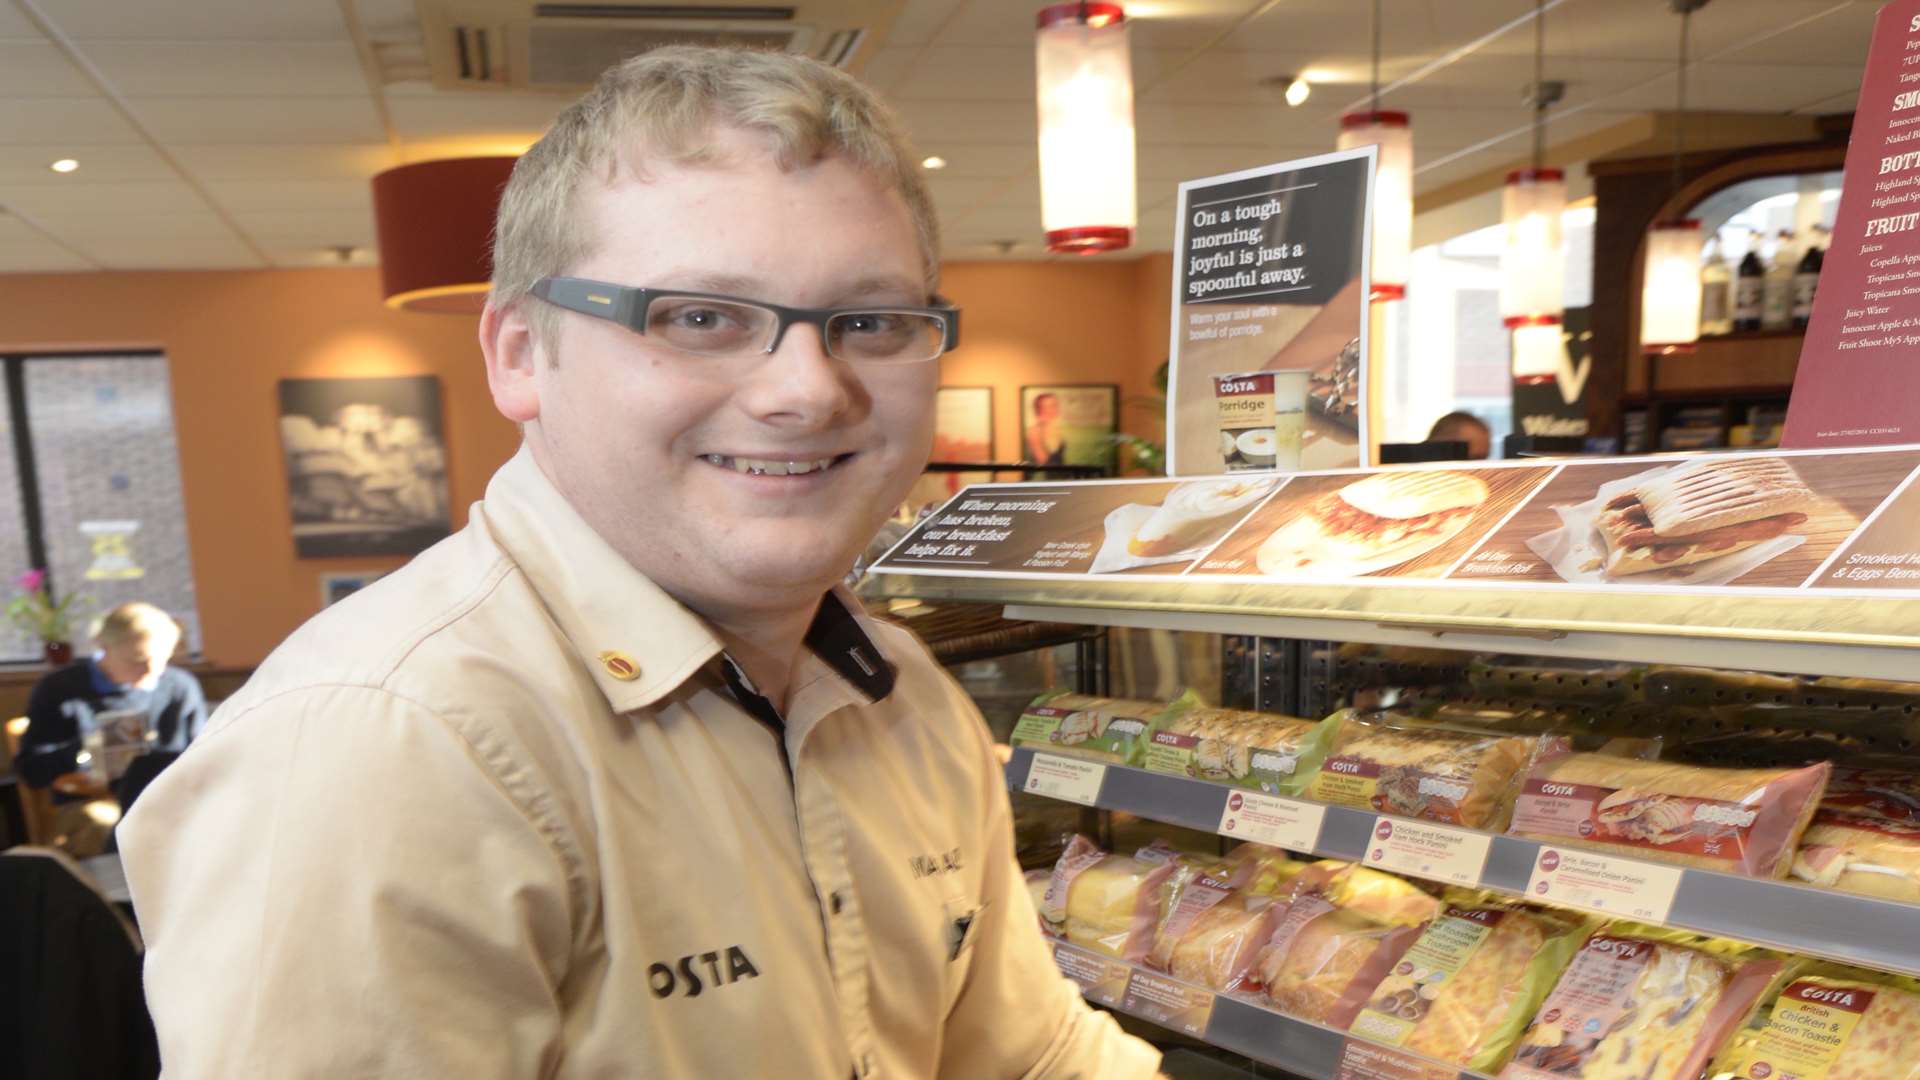 Ben Martin, who is supporting Costa in Market Place.